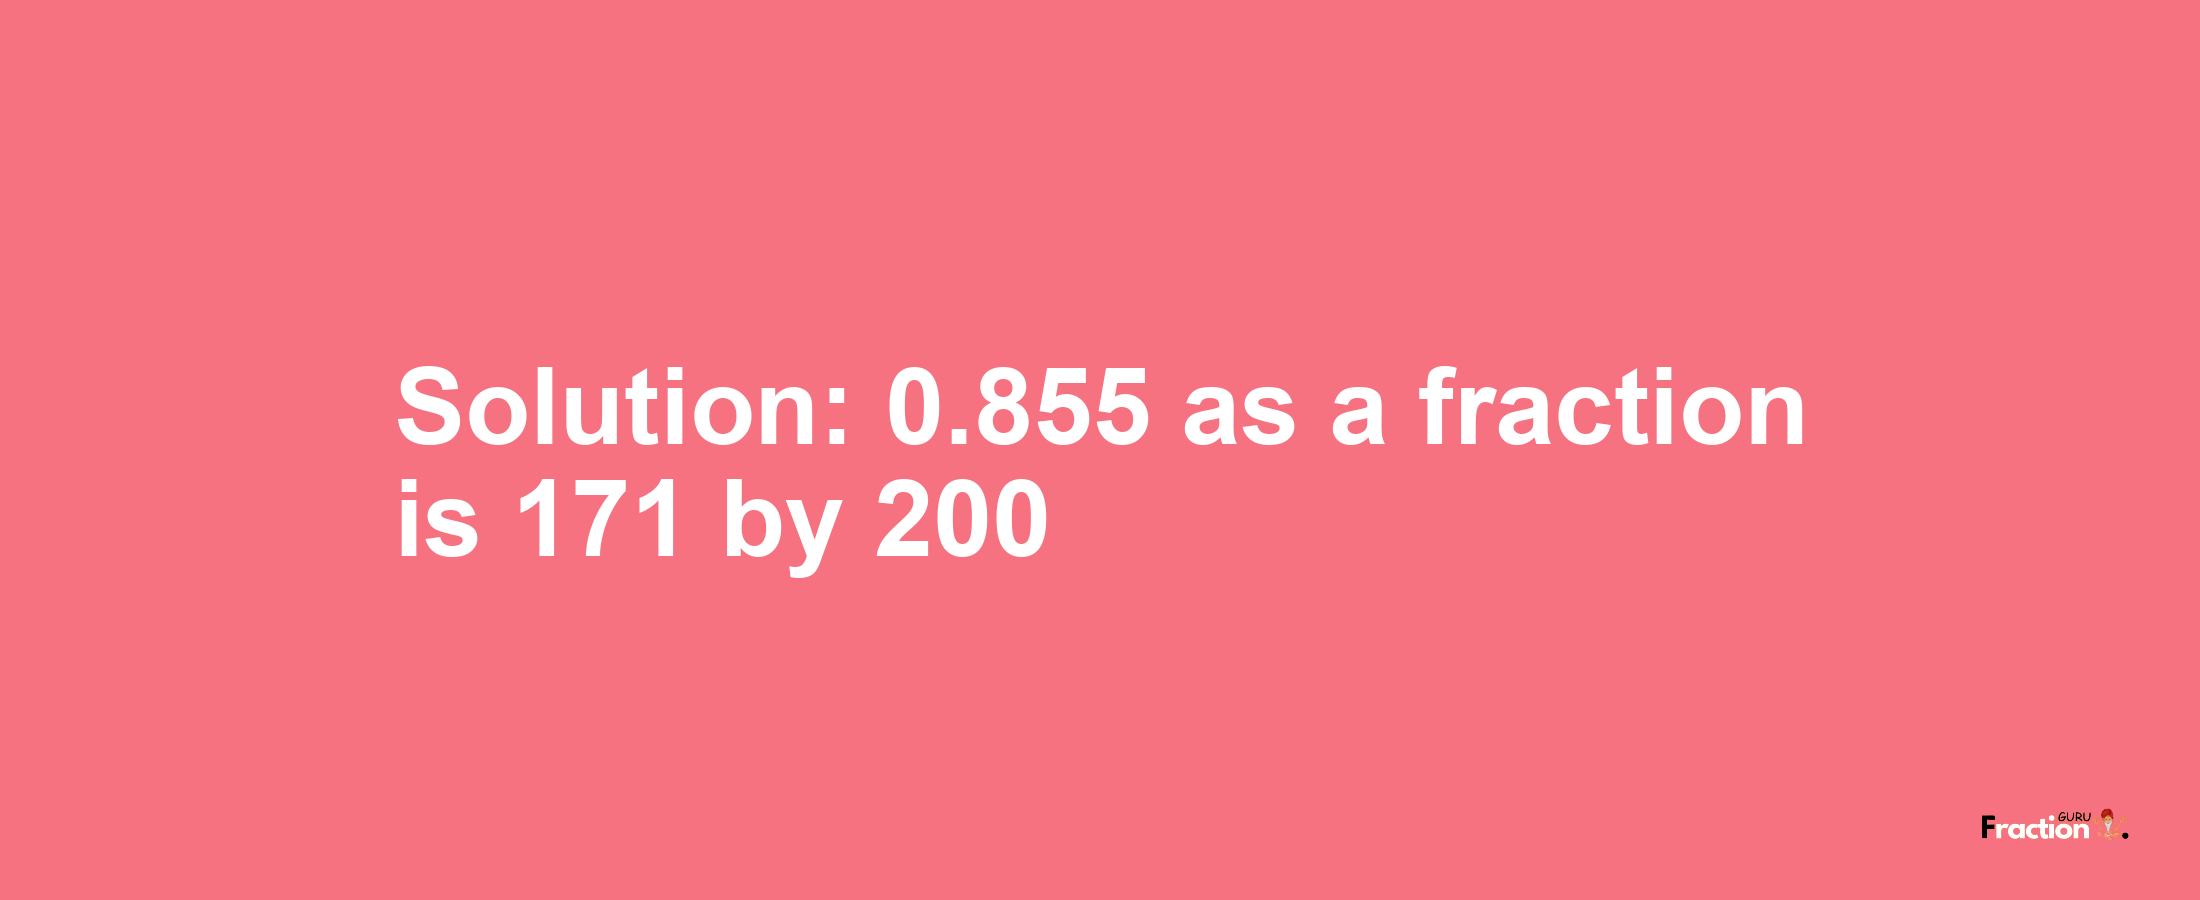 Solution:0.855 as a fraction is 171/200